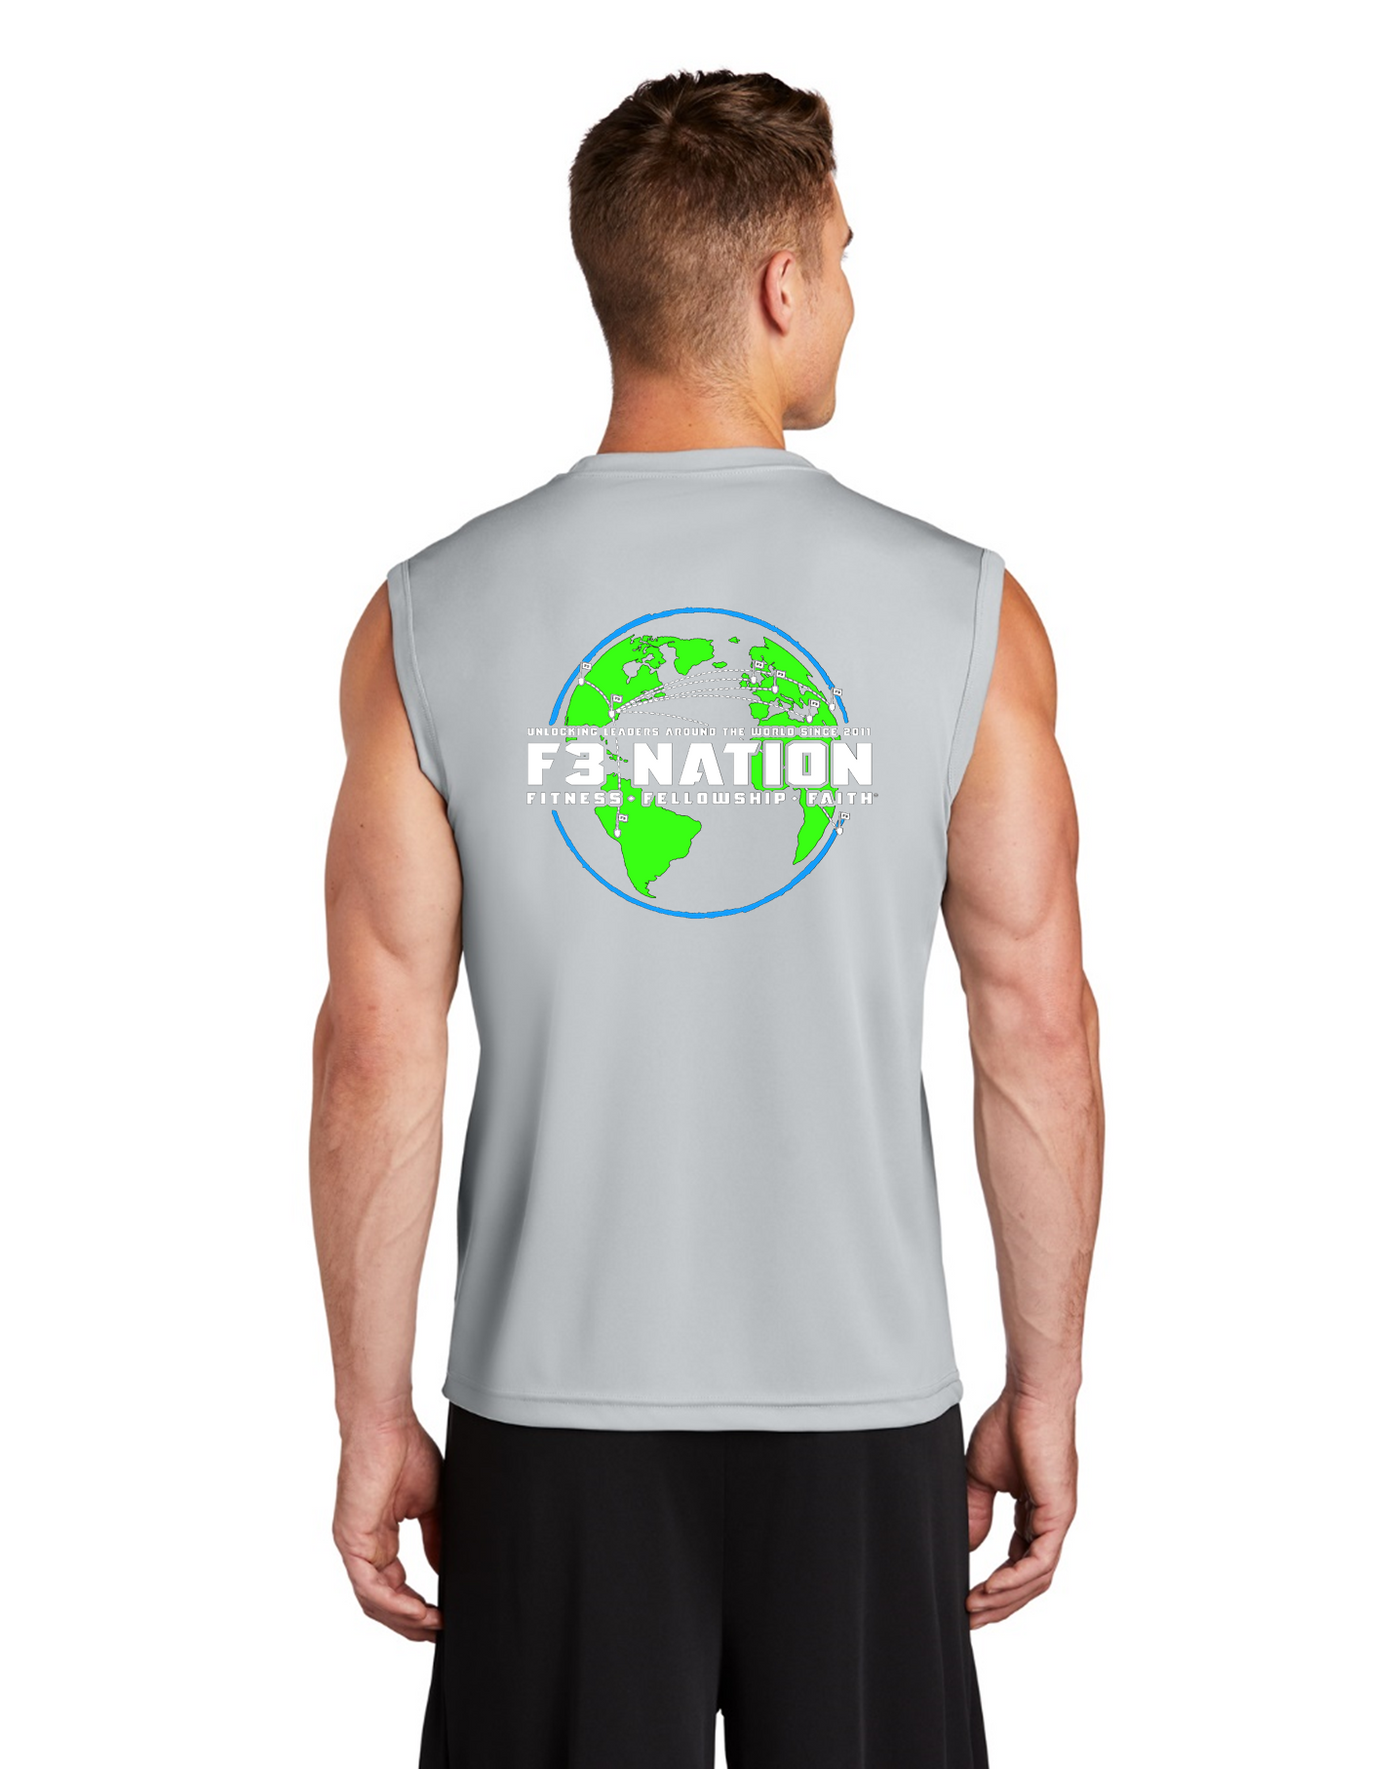 F3 2022 Official F3 Race Jersey - Sport-Tek Sleeveless PosiCharge Competitor Tee Pre-Order